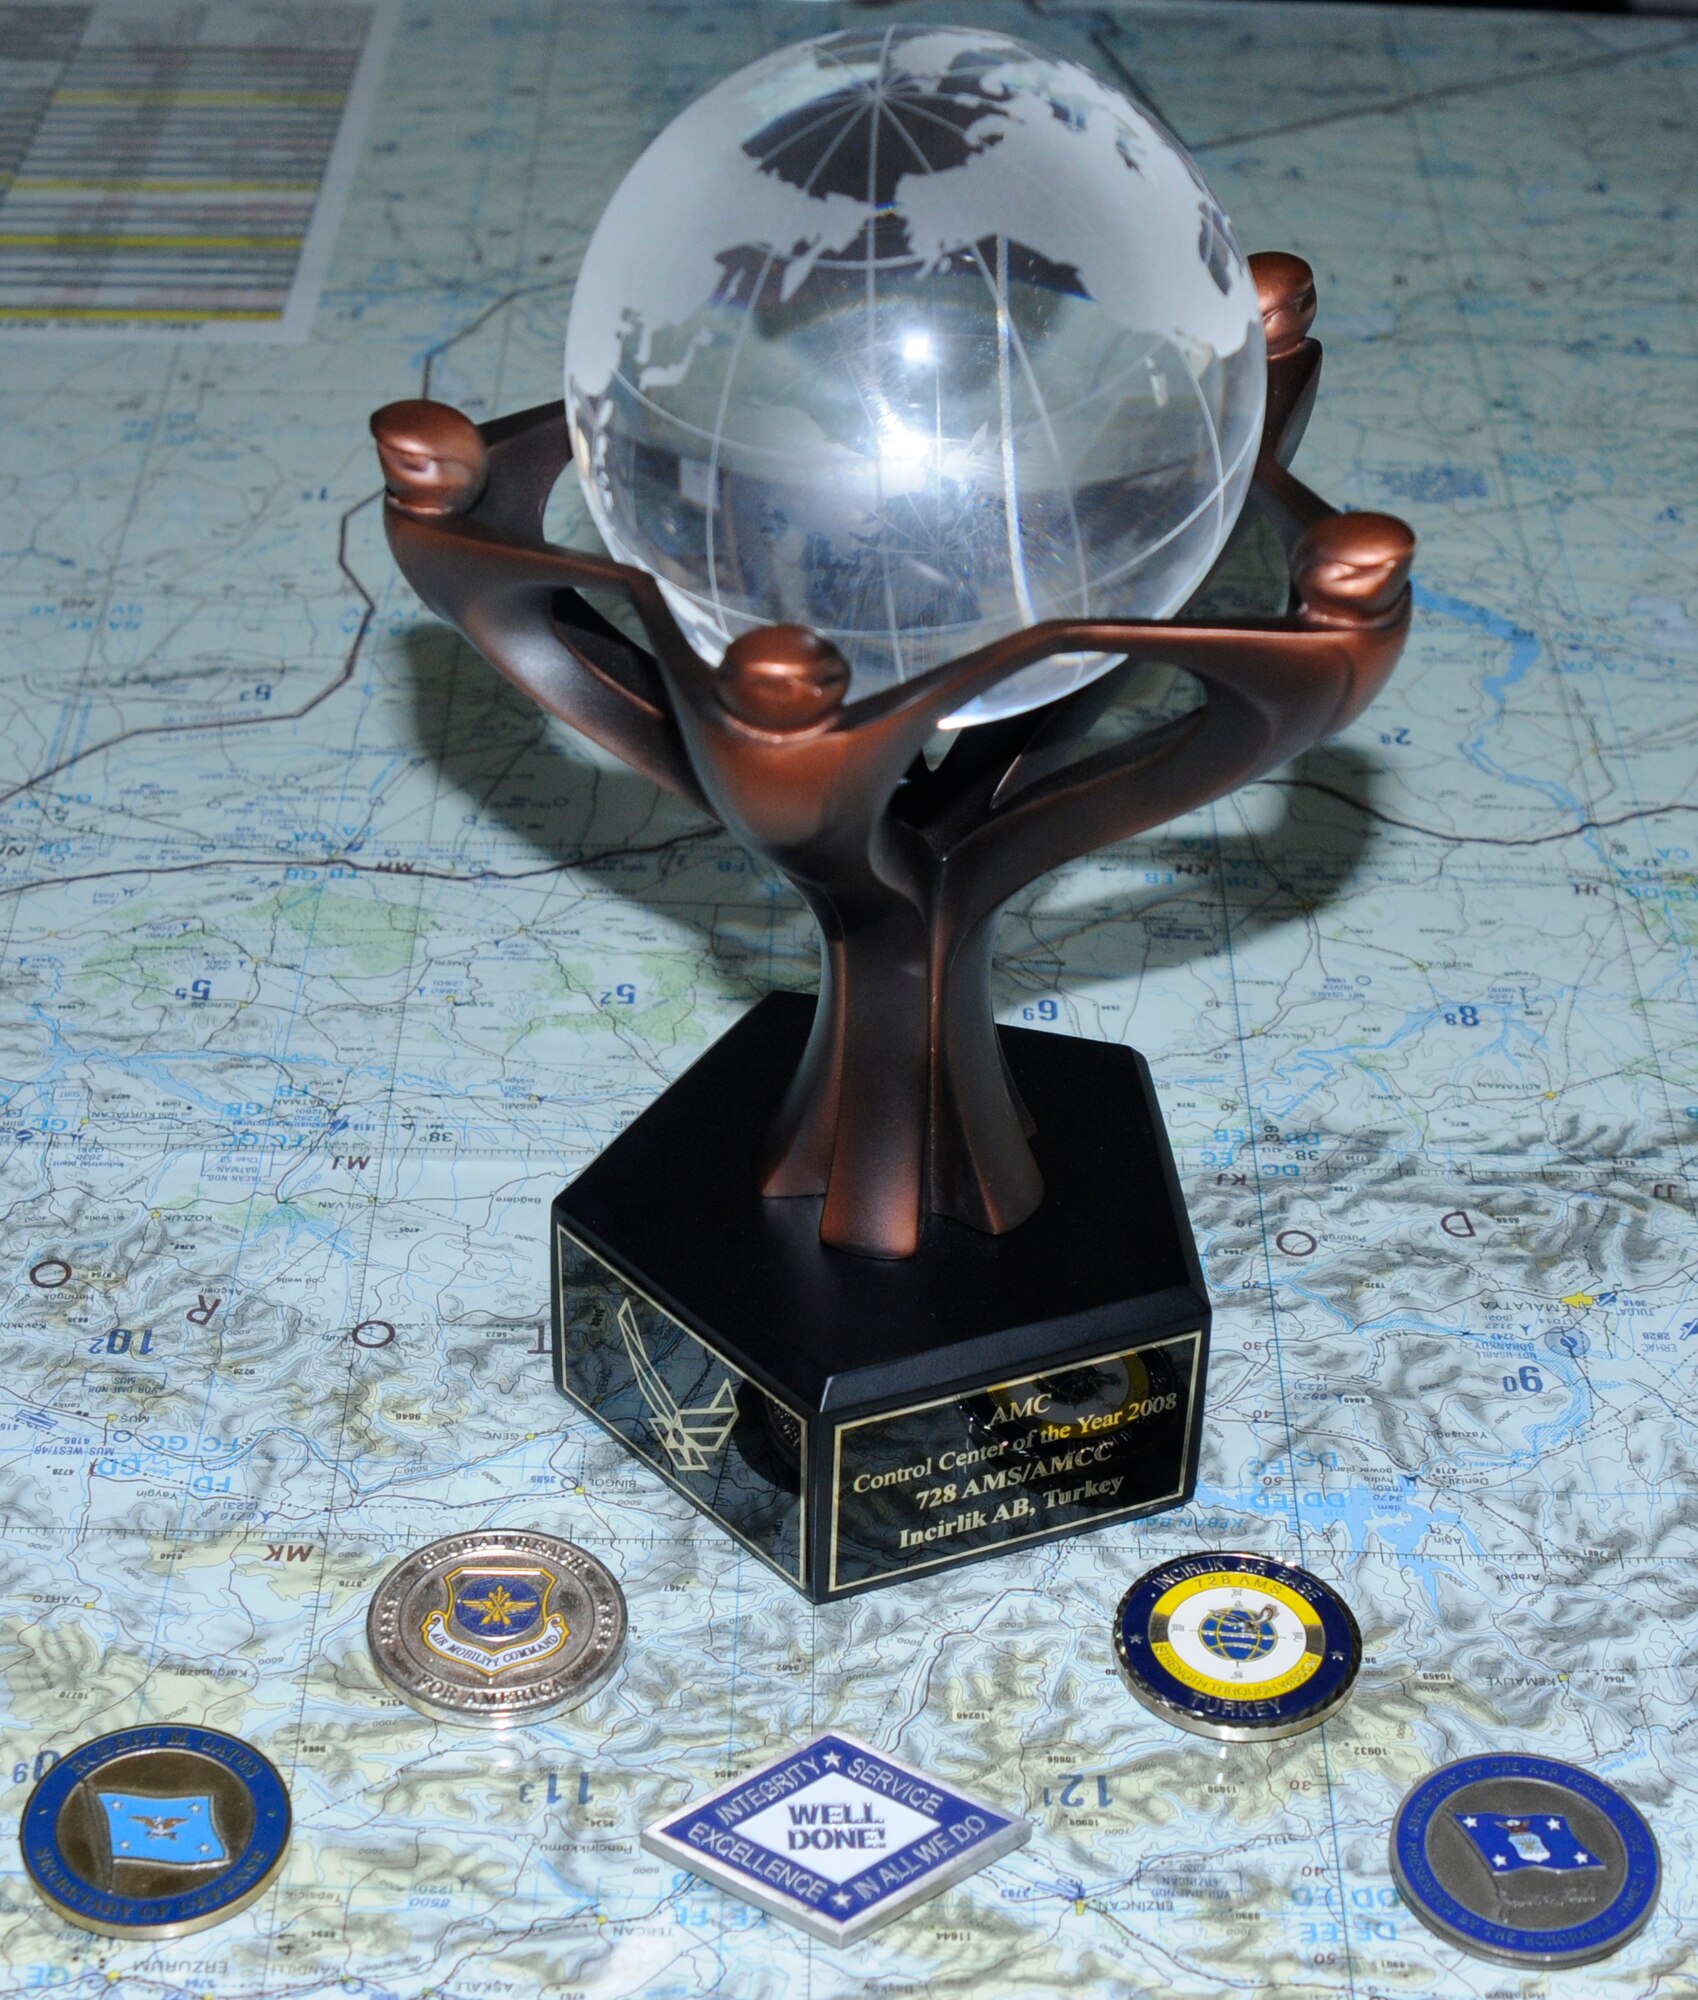 Air Mobility Control Center, which is overseen by the 728th Air Mobility Squadron, was awarded best AMCC in Air Mobility Command for 2008.  (U.S. Air Force photo/Airman 1st Class Amber Russell)